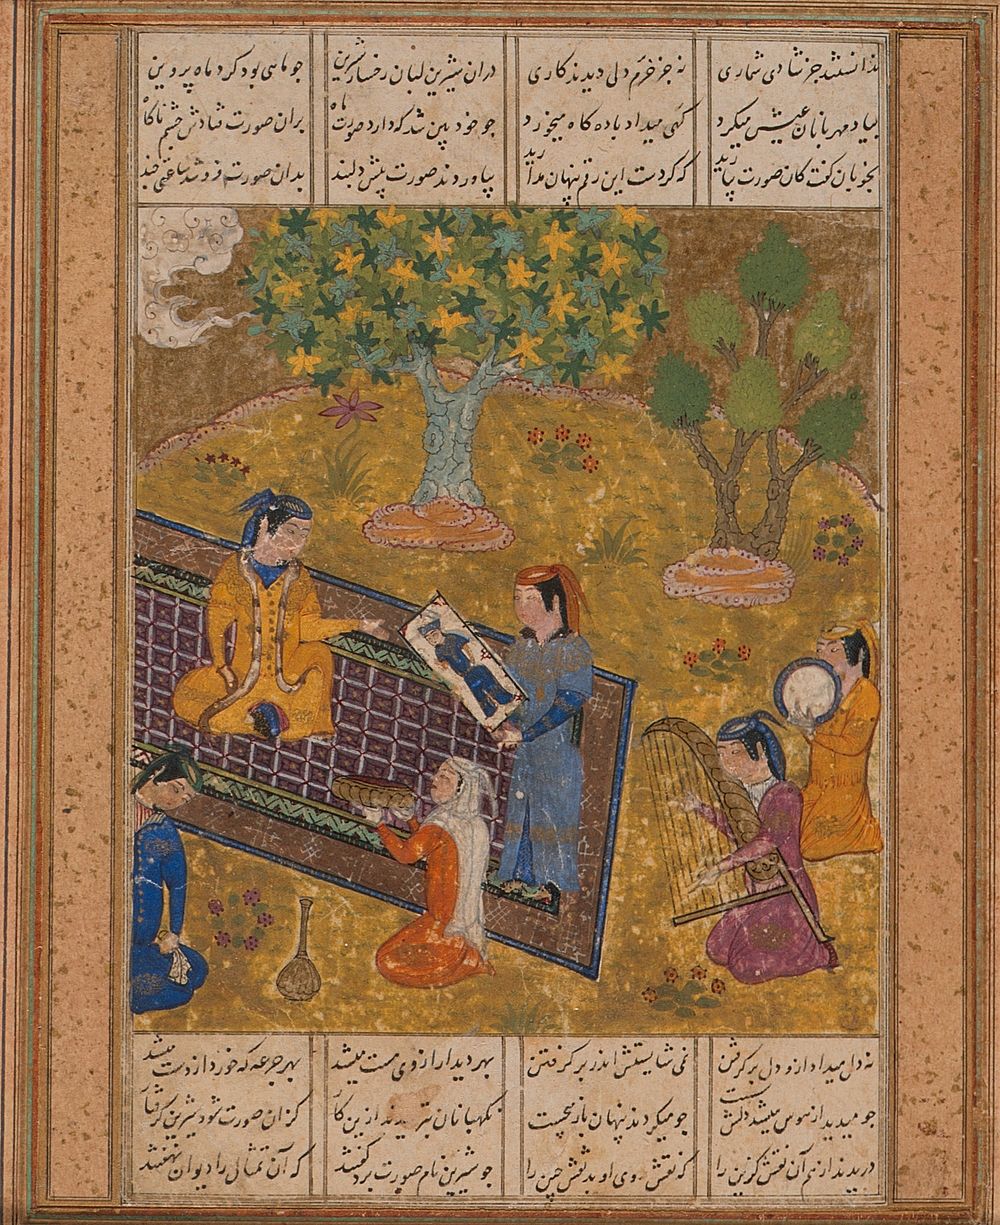 Shirin Sees a Portrait of Khusraw, Page from a Manuscript of the Khamsa (Quintet) of Nizami